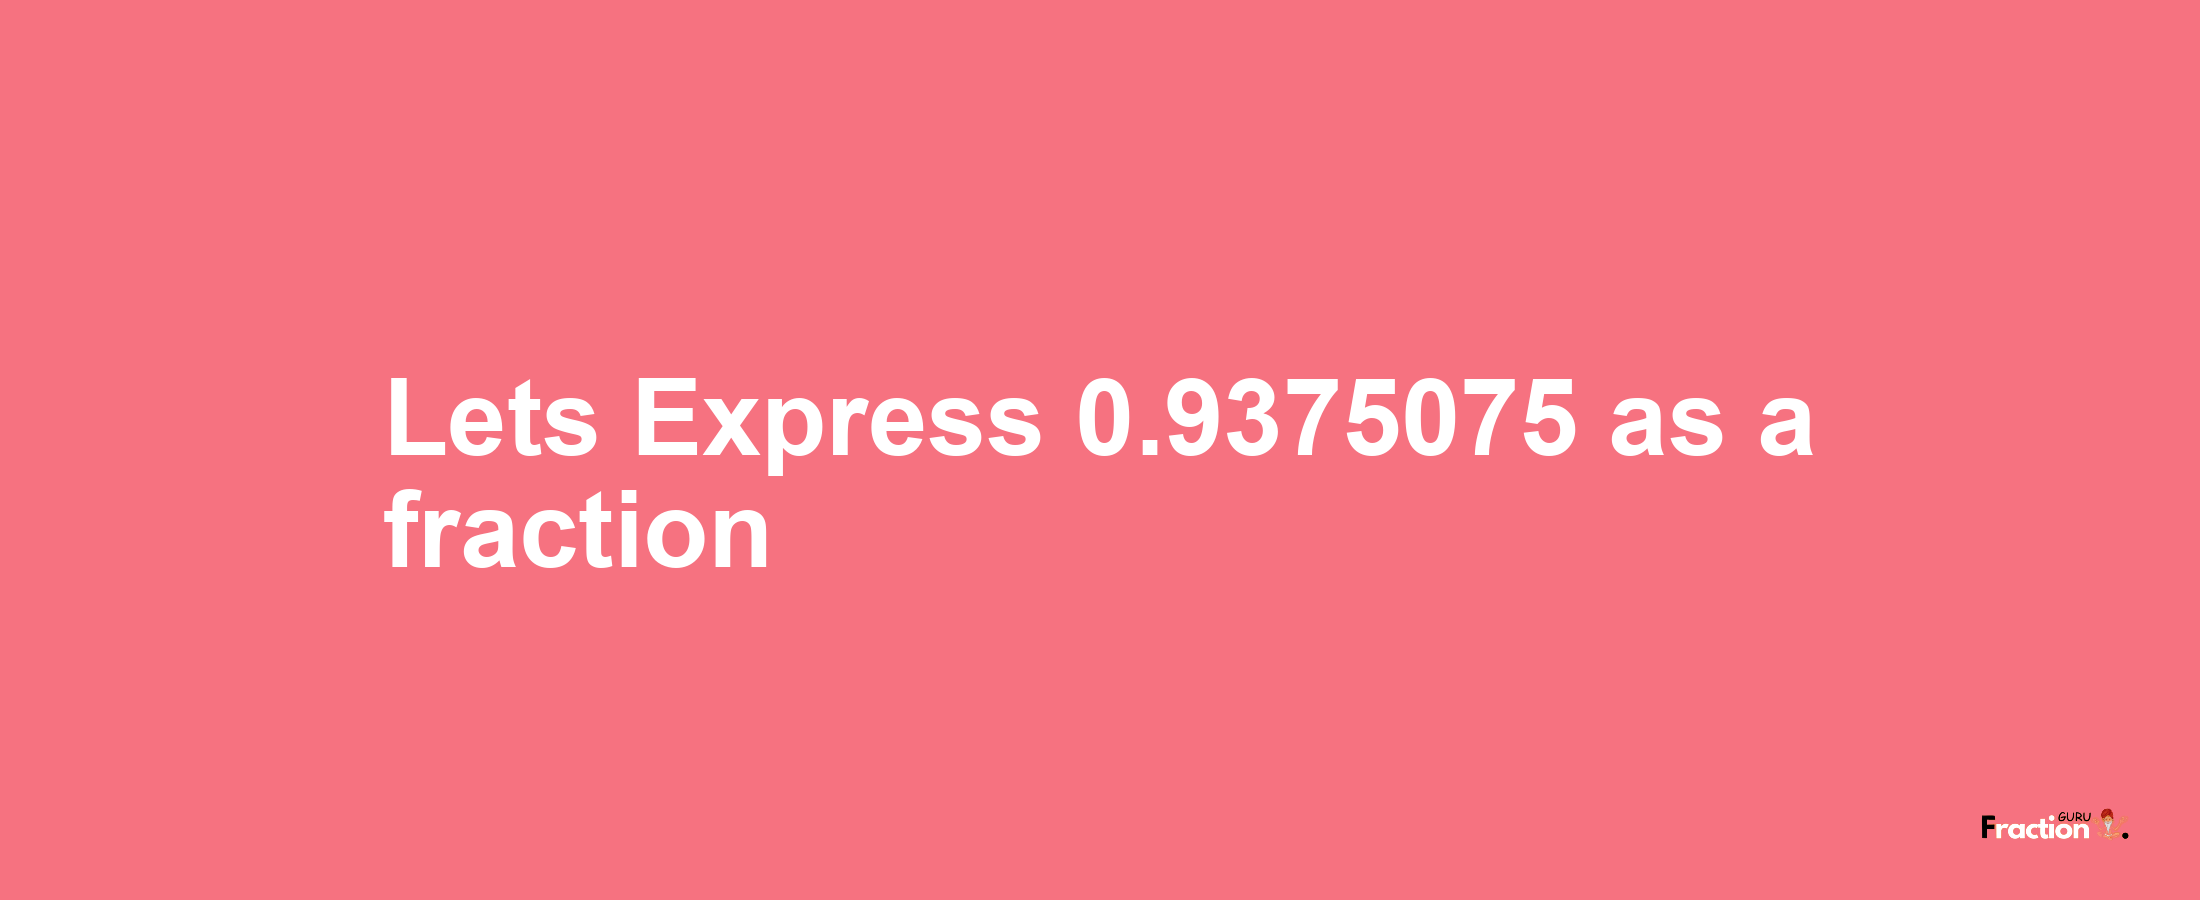 Lets Express 0.9375075 as afraction